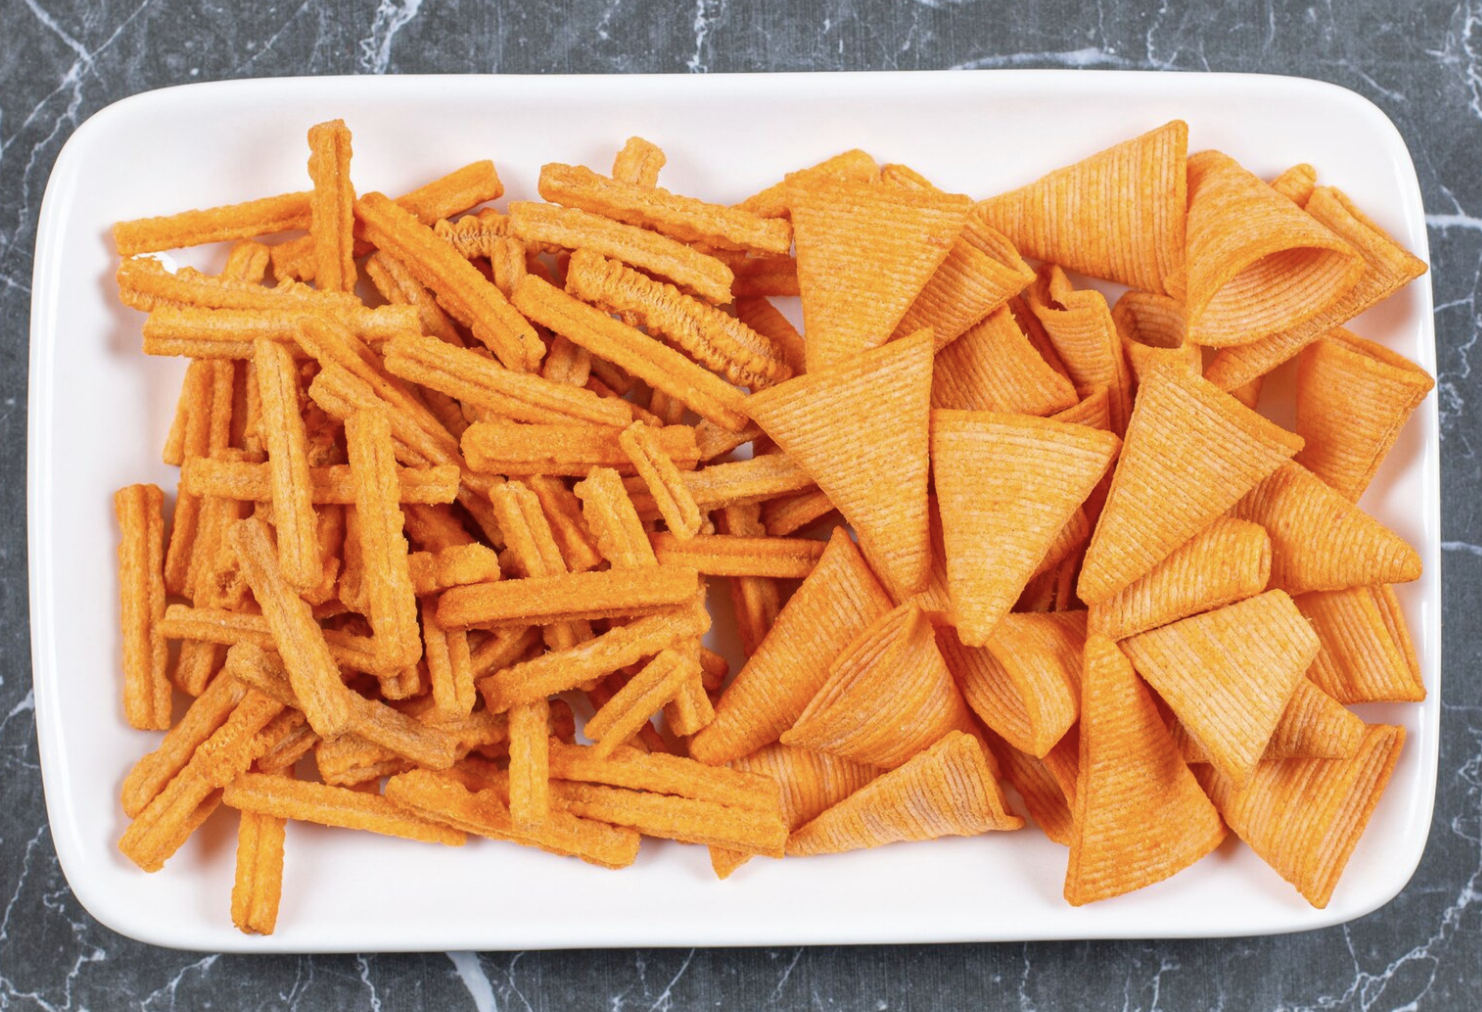 8 Air-Fryer Snacks You’ll Want to Make Every Day